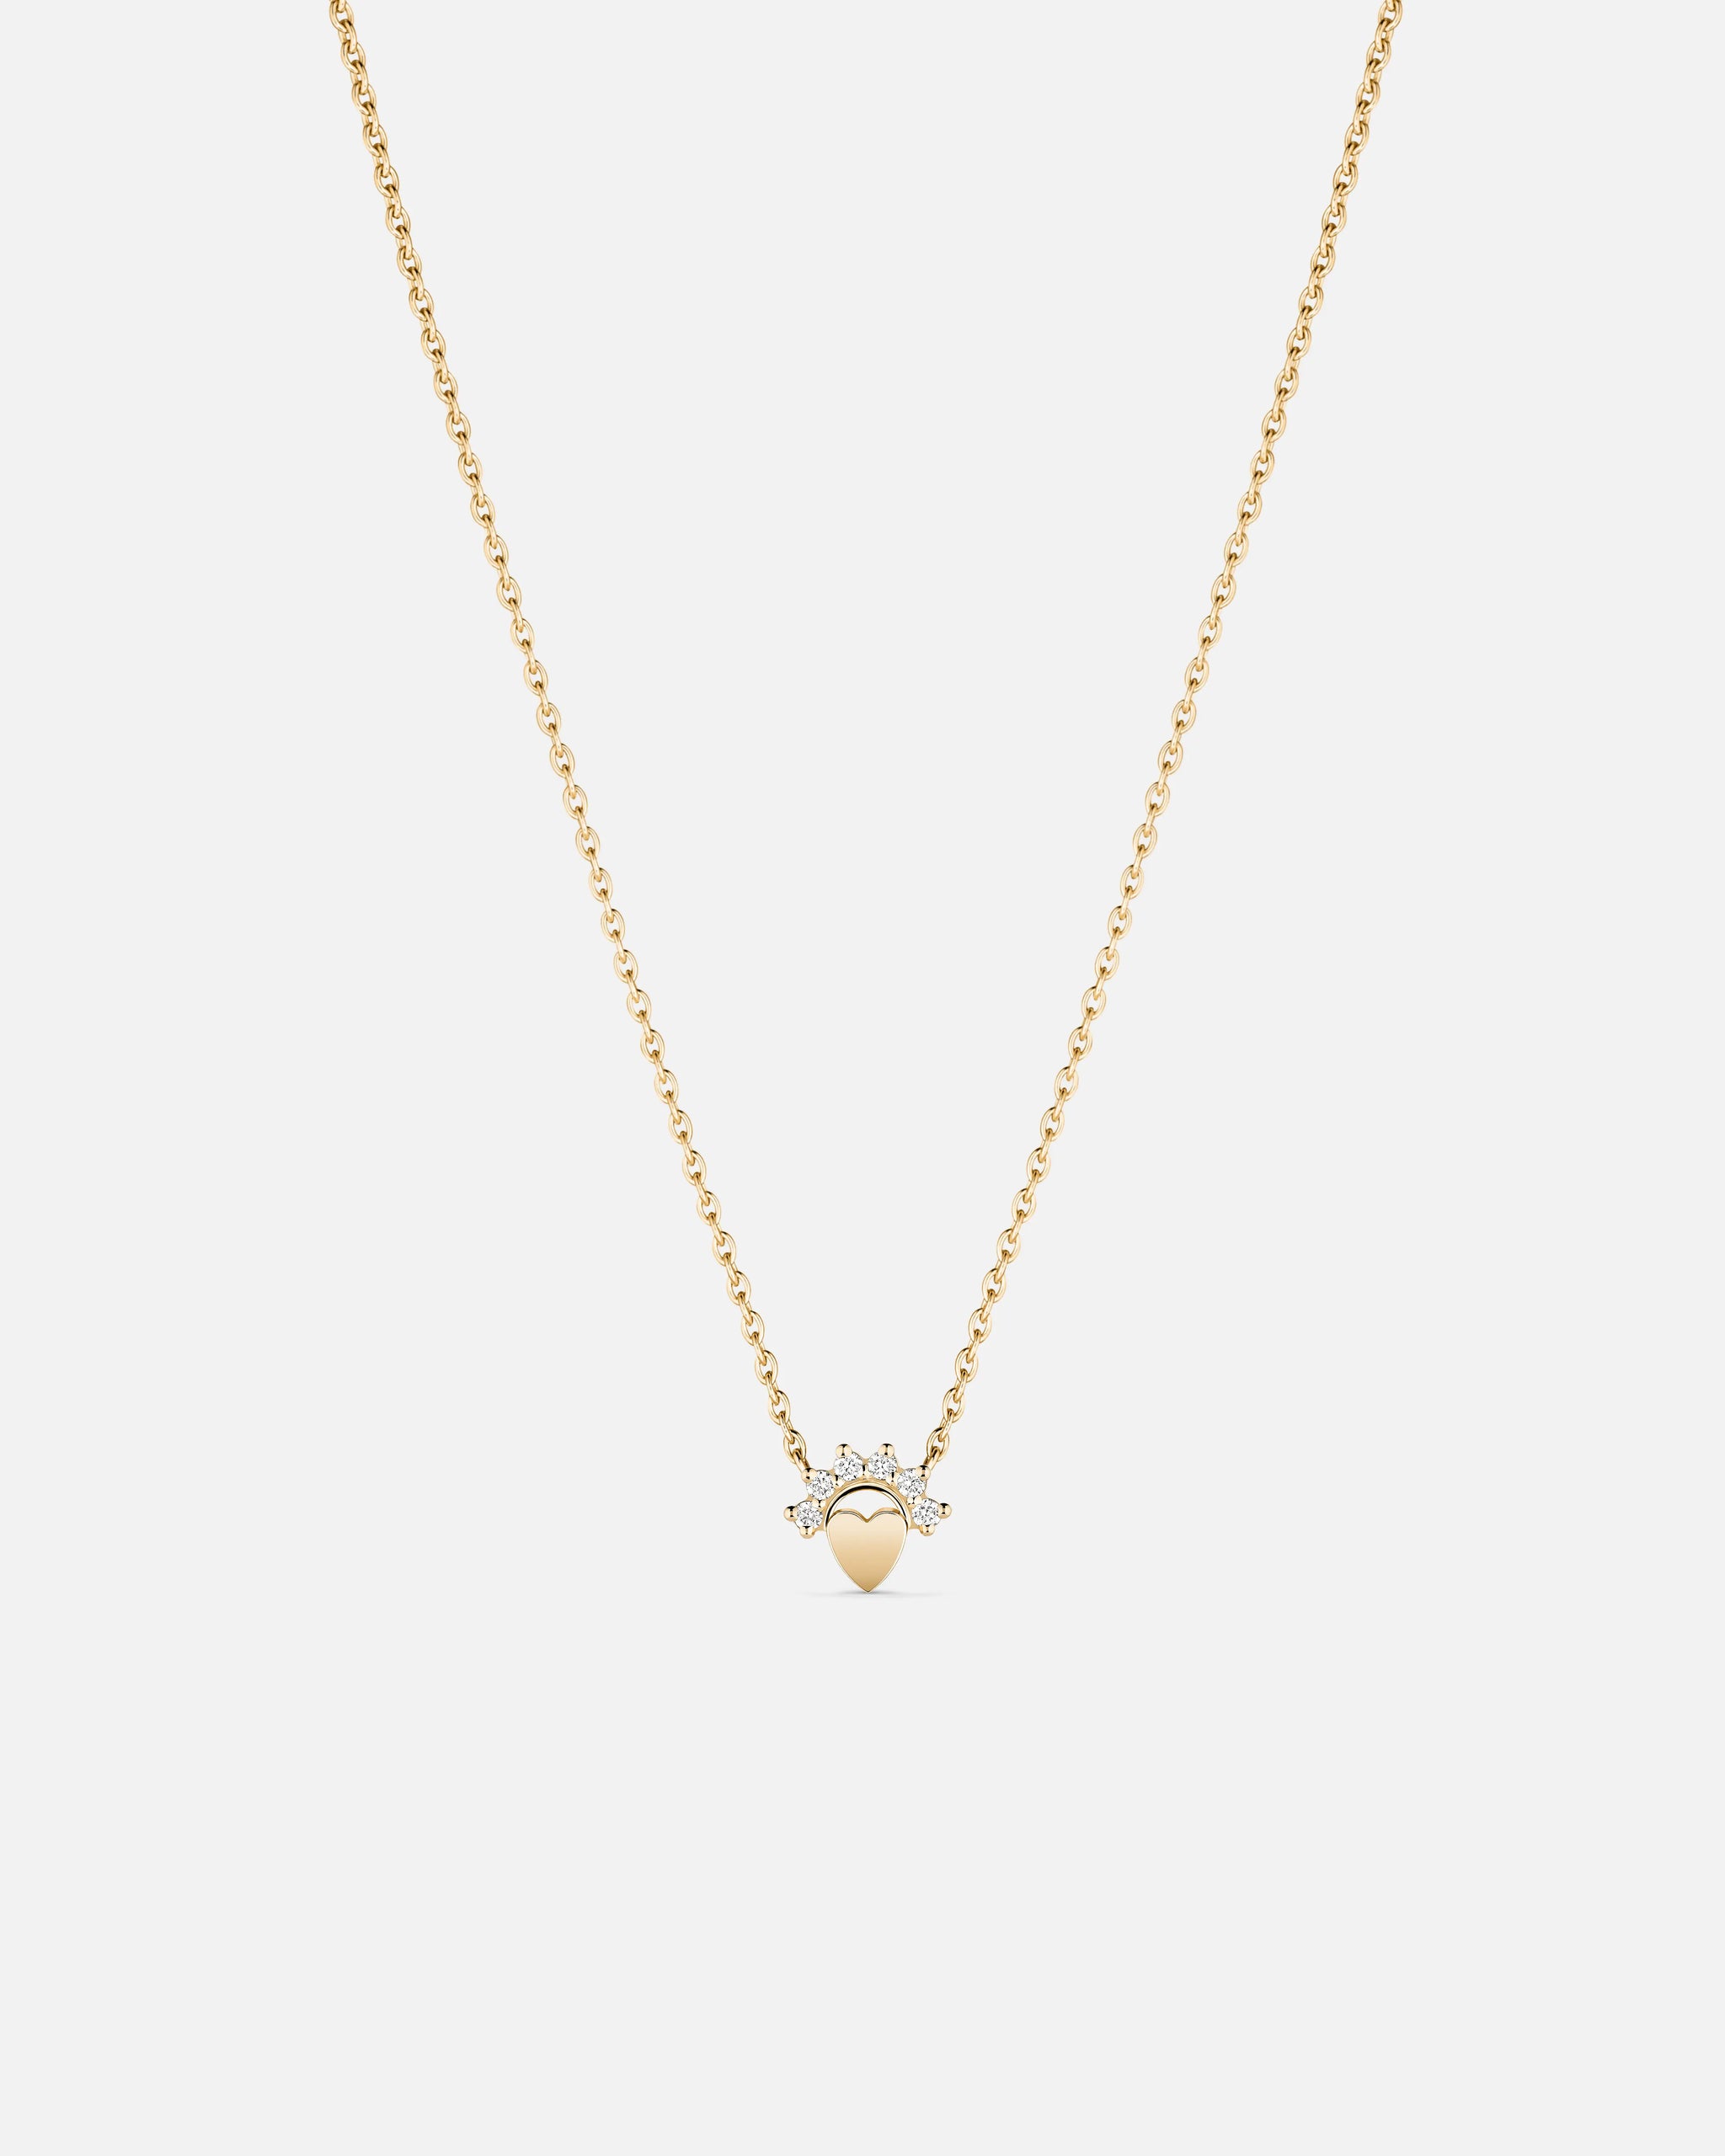 Small Love Pendant in Yellow Gold - 1 - Nouvel Heritage